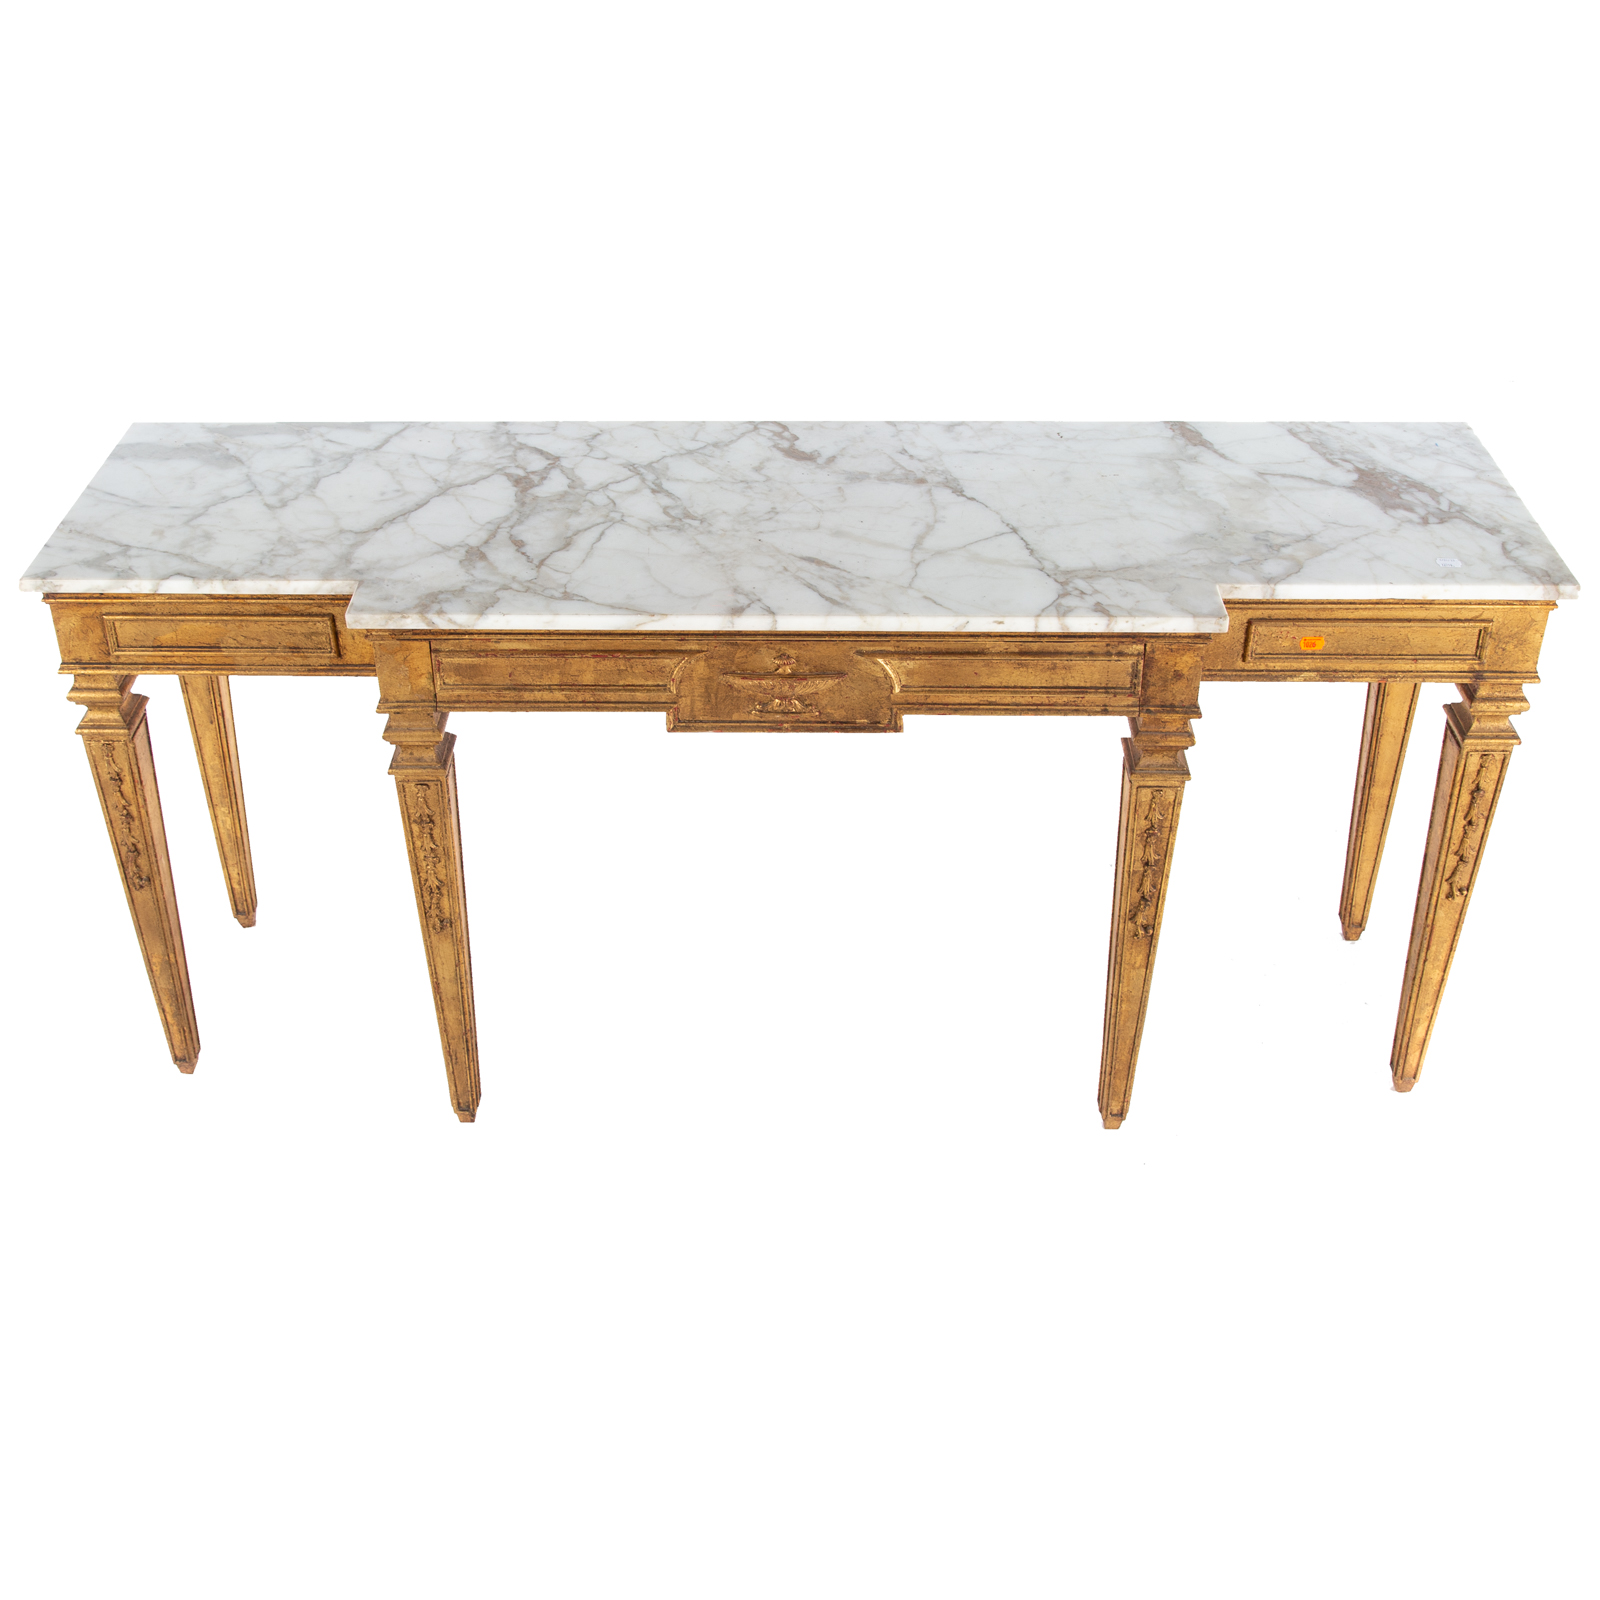 FRENCH GILTWOOD & MARBLE TOP CONSOLE